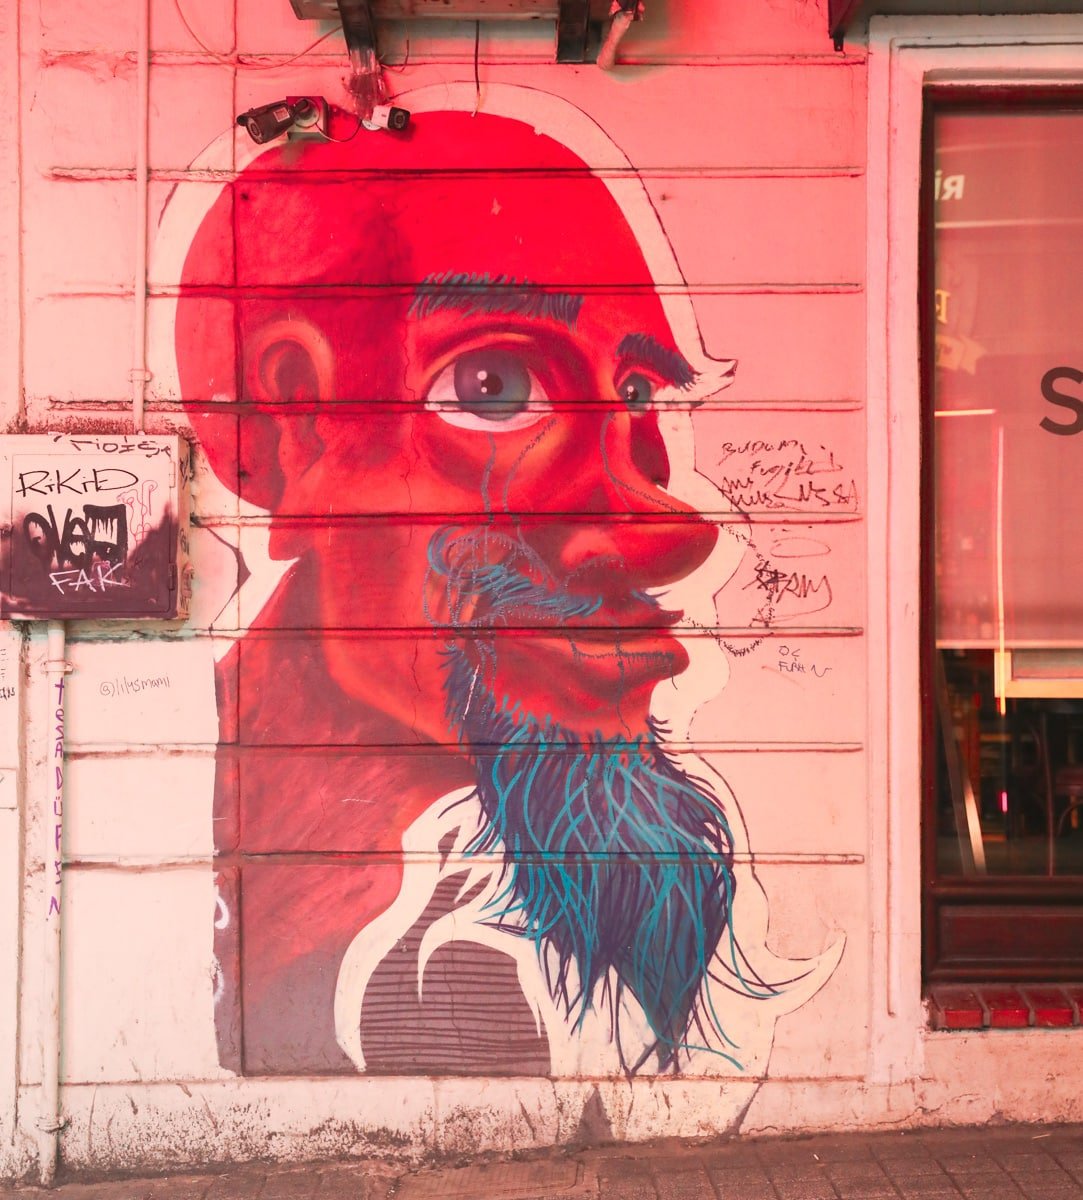 A colorful mural of a bearded man's face painted on an urban wall, with light graffiti and tags surrounding it.